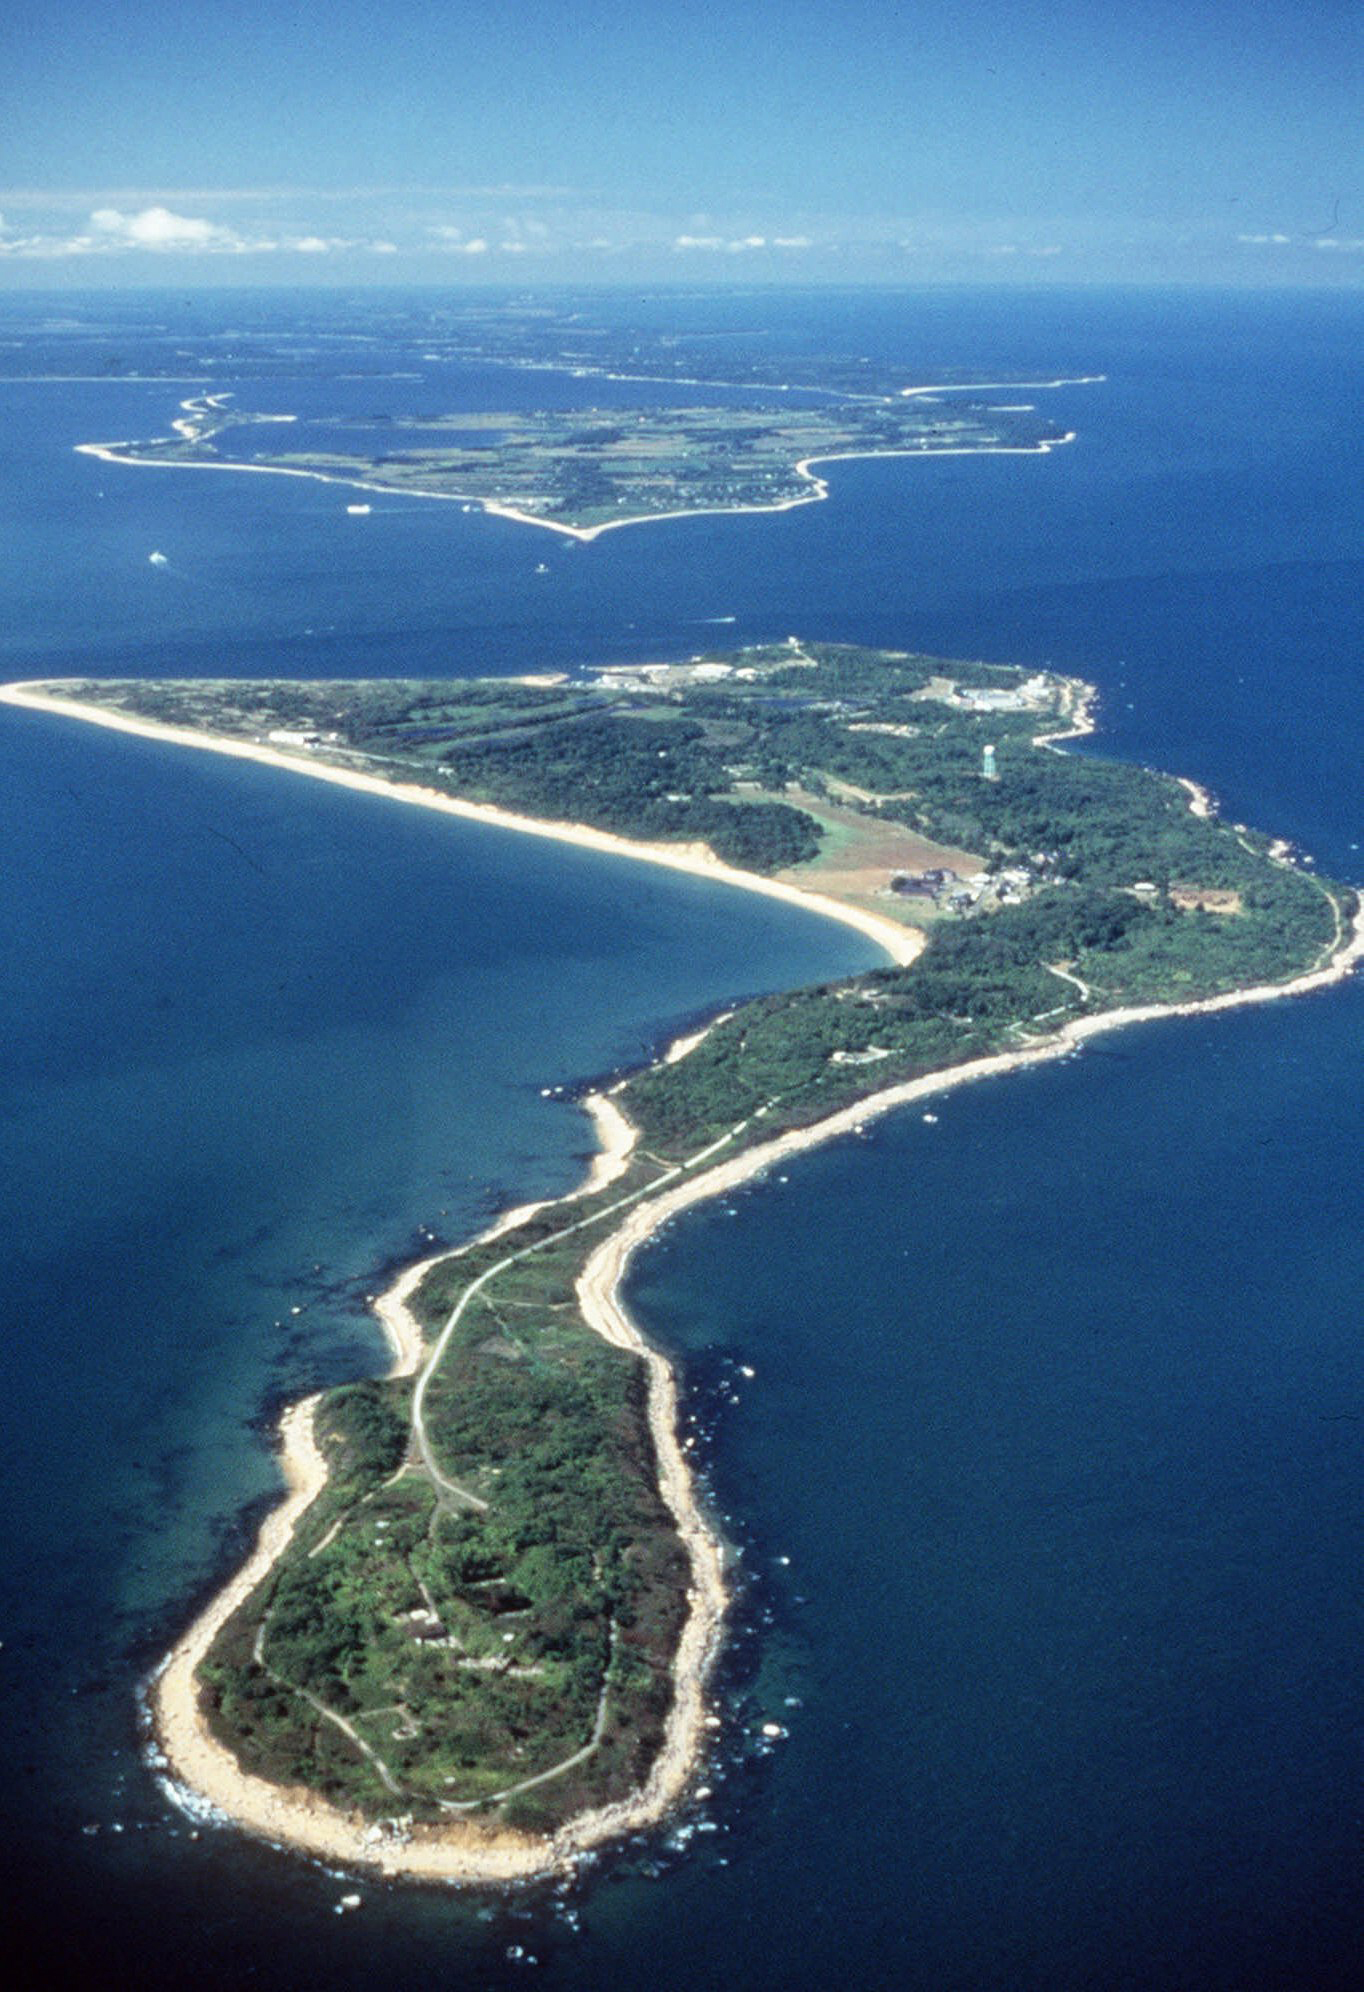 Lawsuit to protect Plum Island moves forward